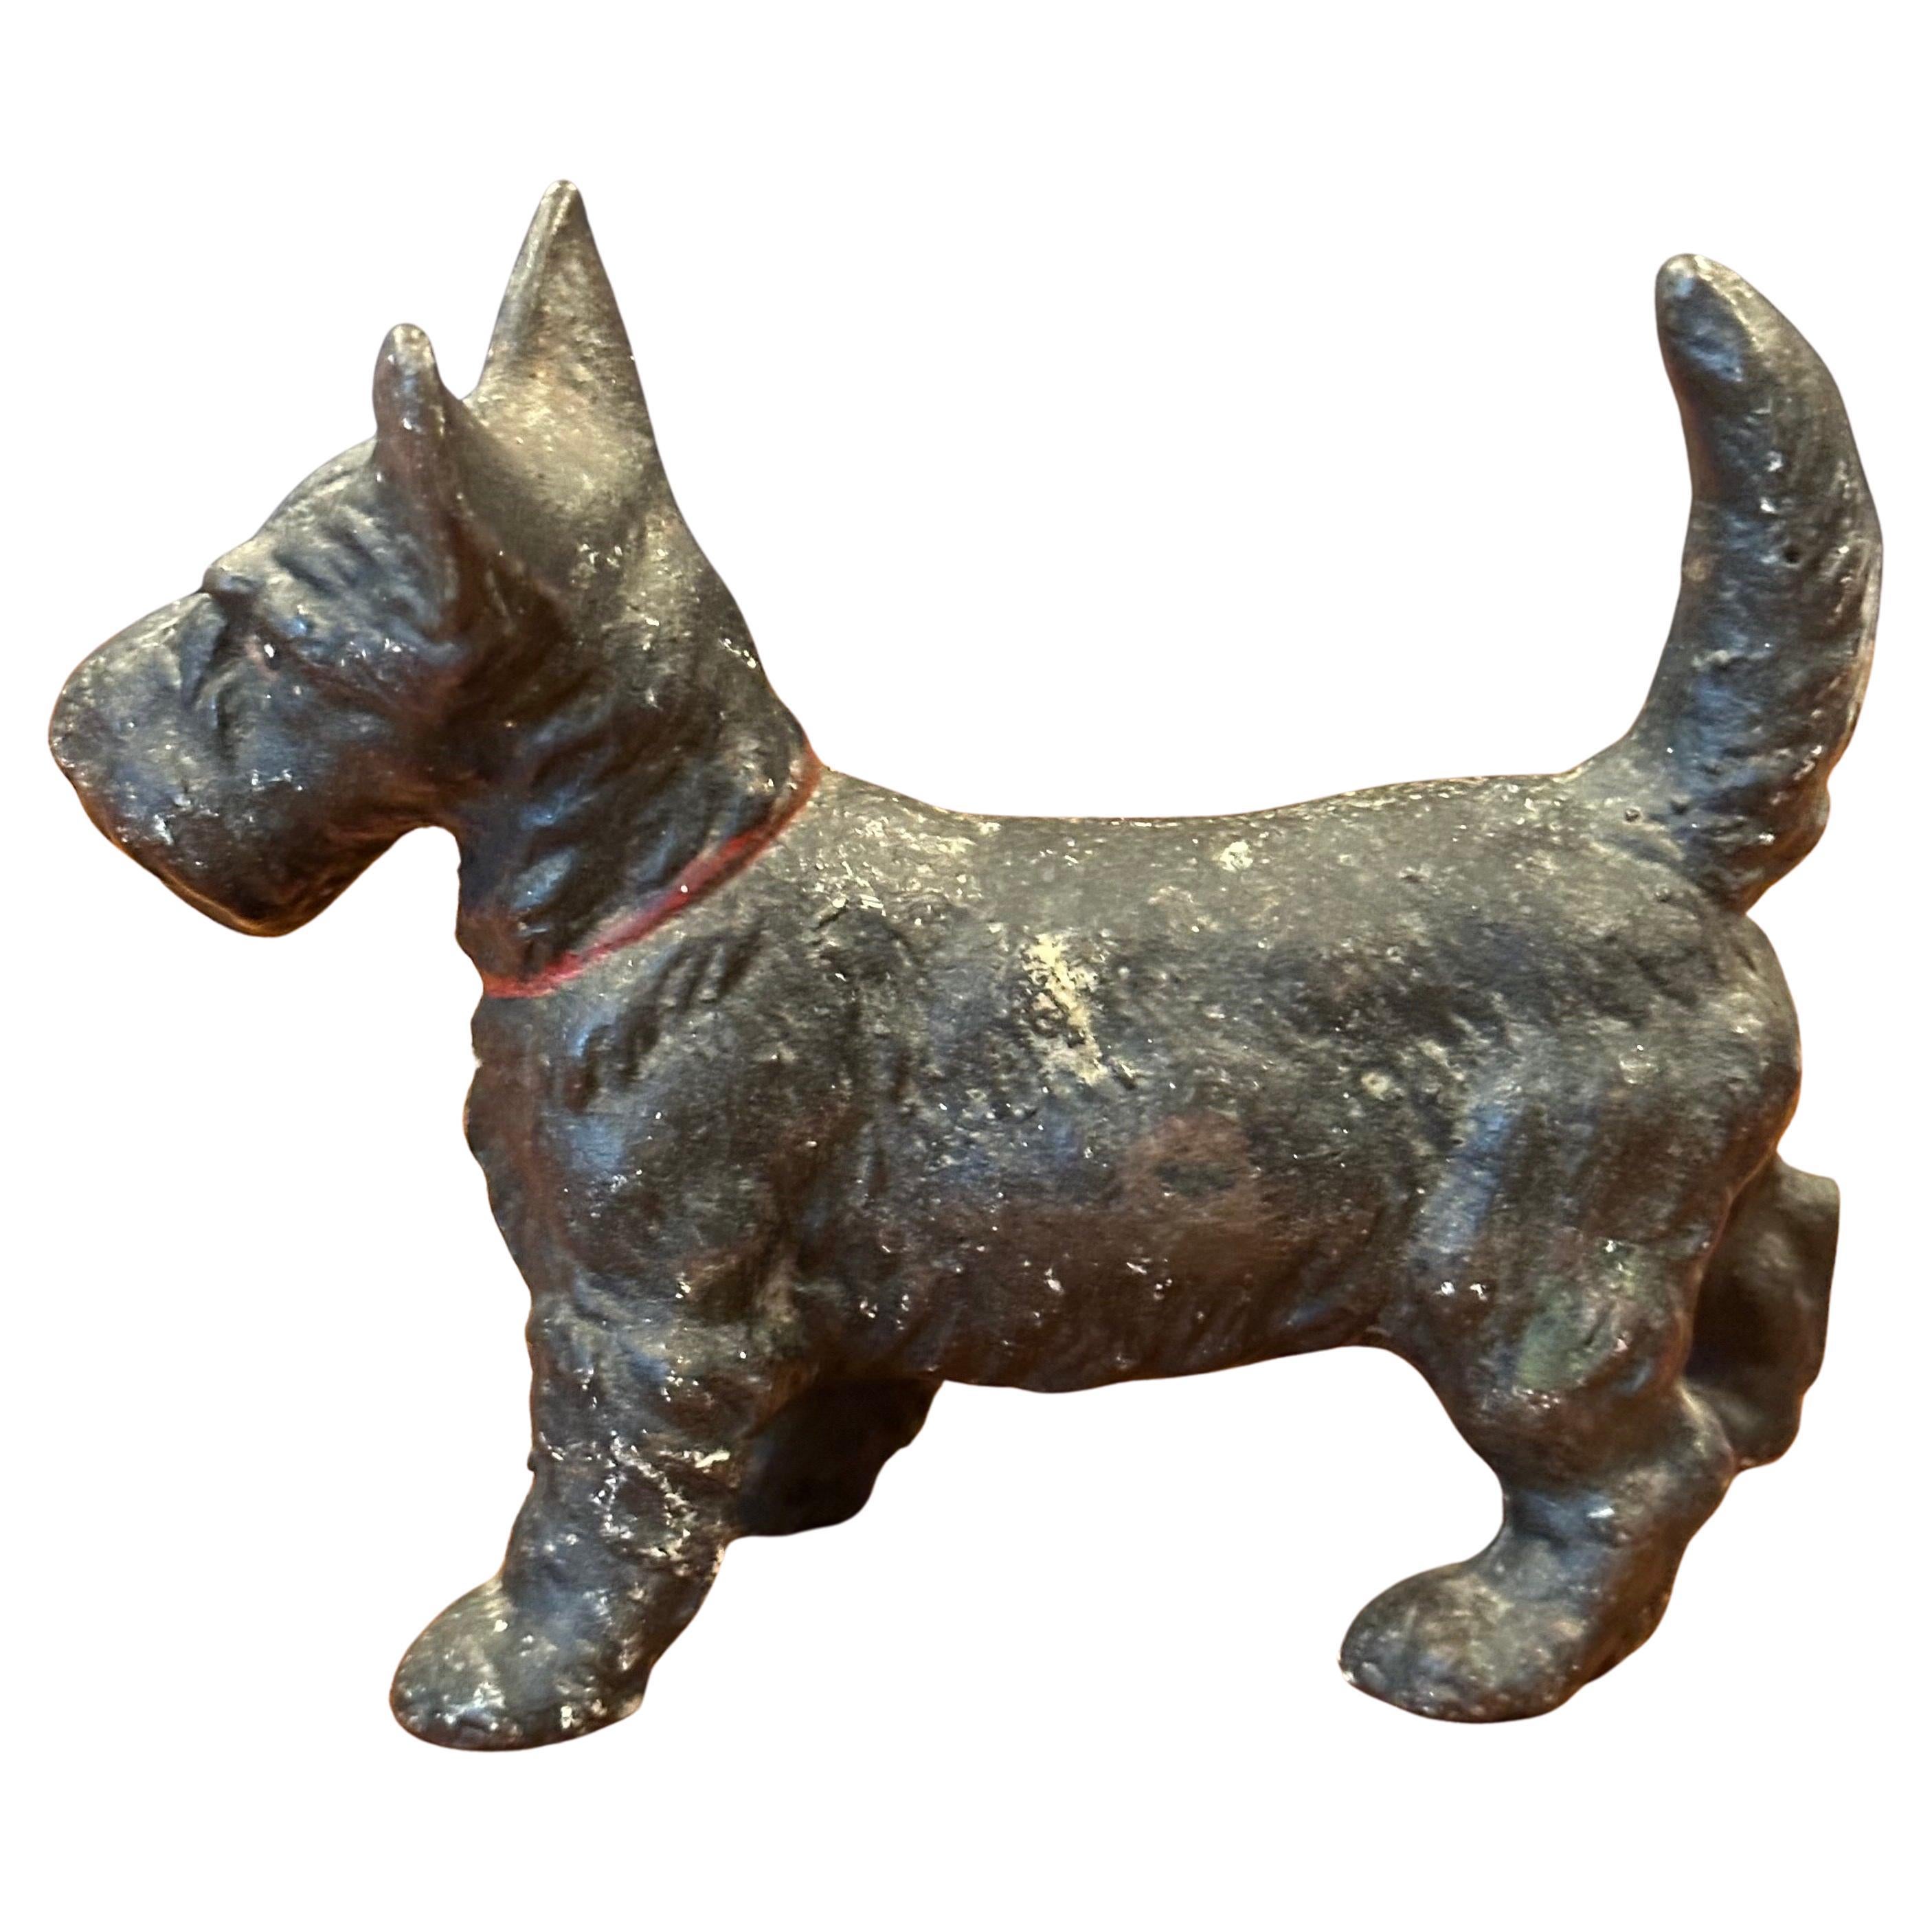 A wonderful vintage Scottie dog cast iron dor stop or sculpture, circa 1940s. The piece is in very good vintage condition and measures 6.5